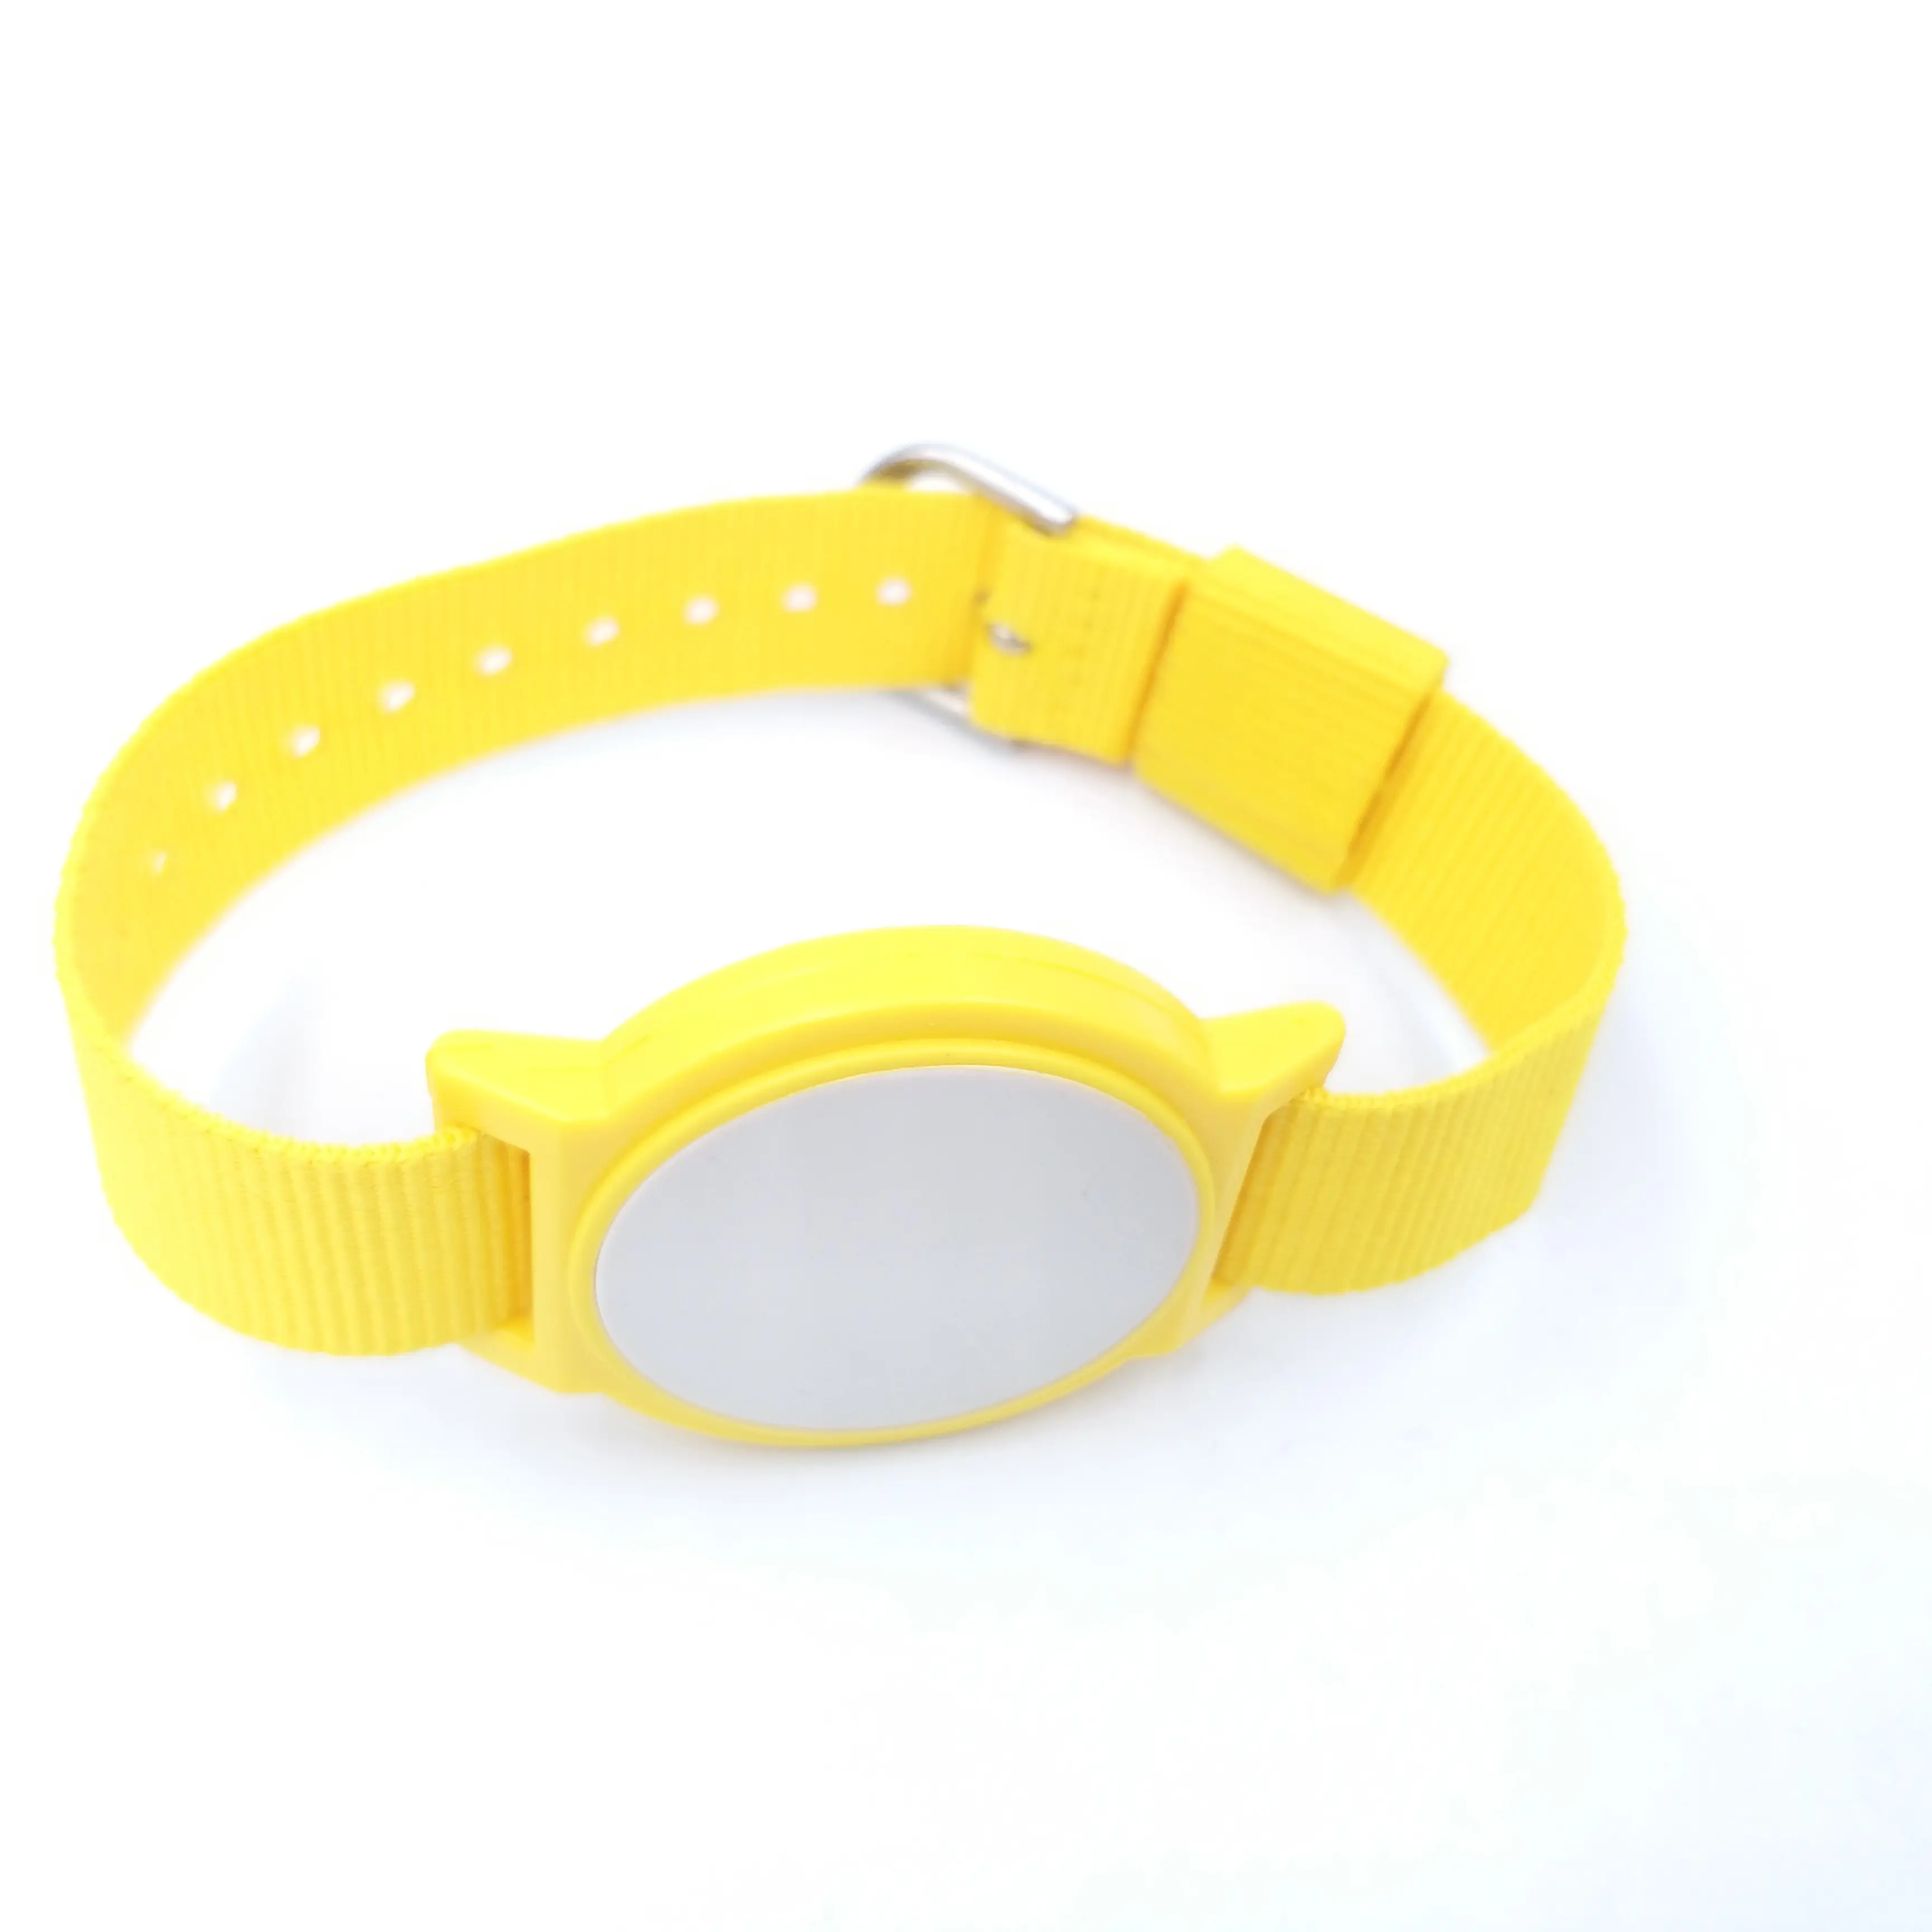 Woven Fabric NFC RFID Watch with metal watch buckle and adjustable strap working all NFC Phones